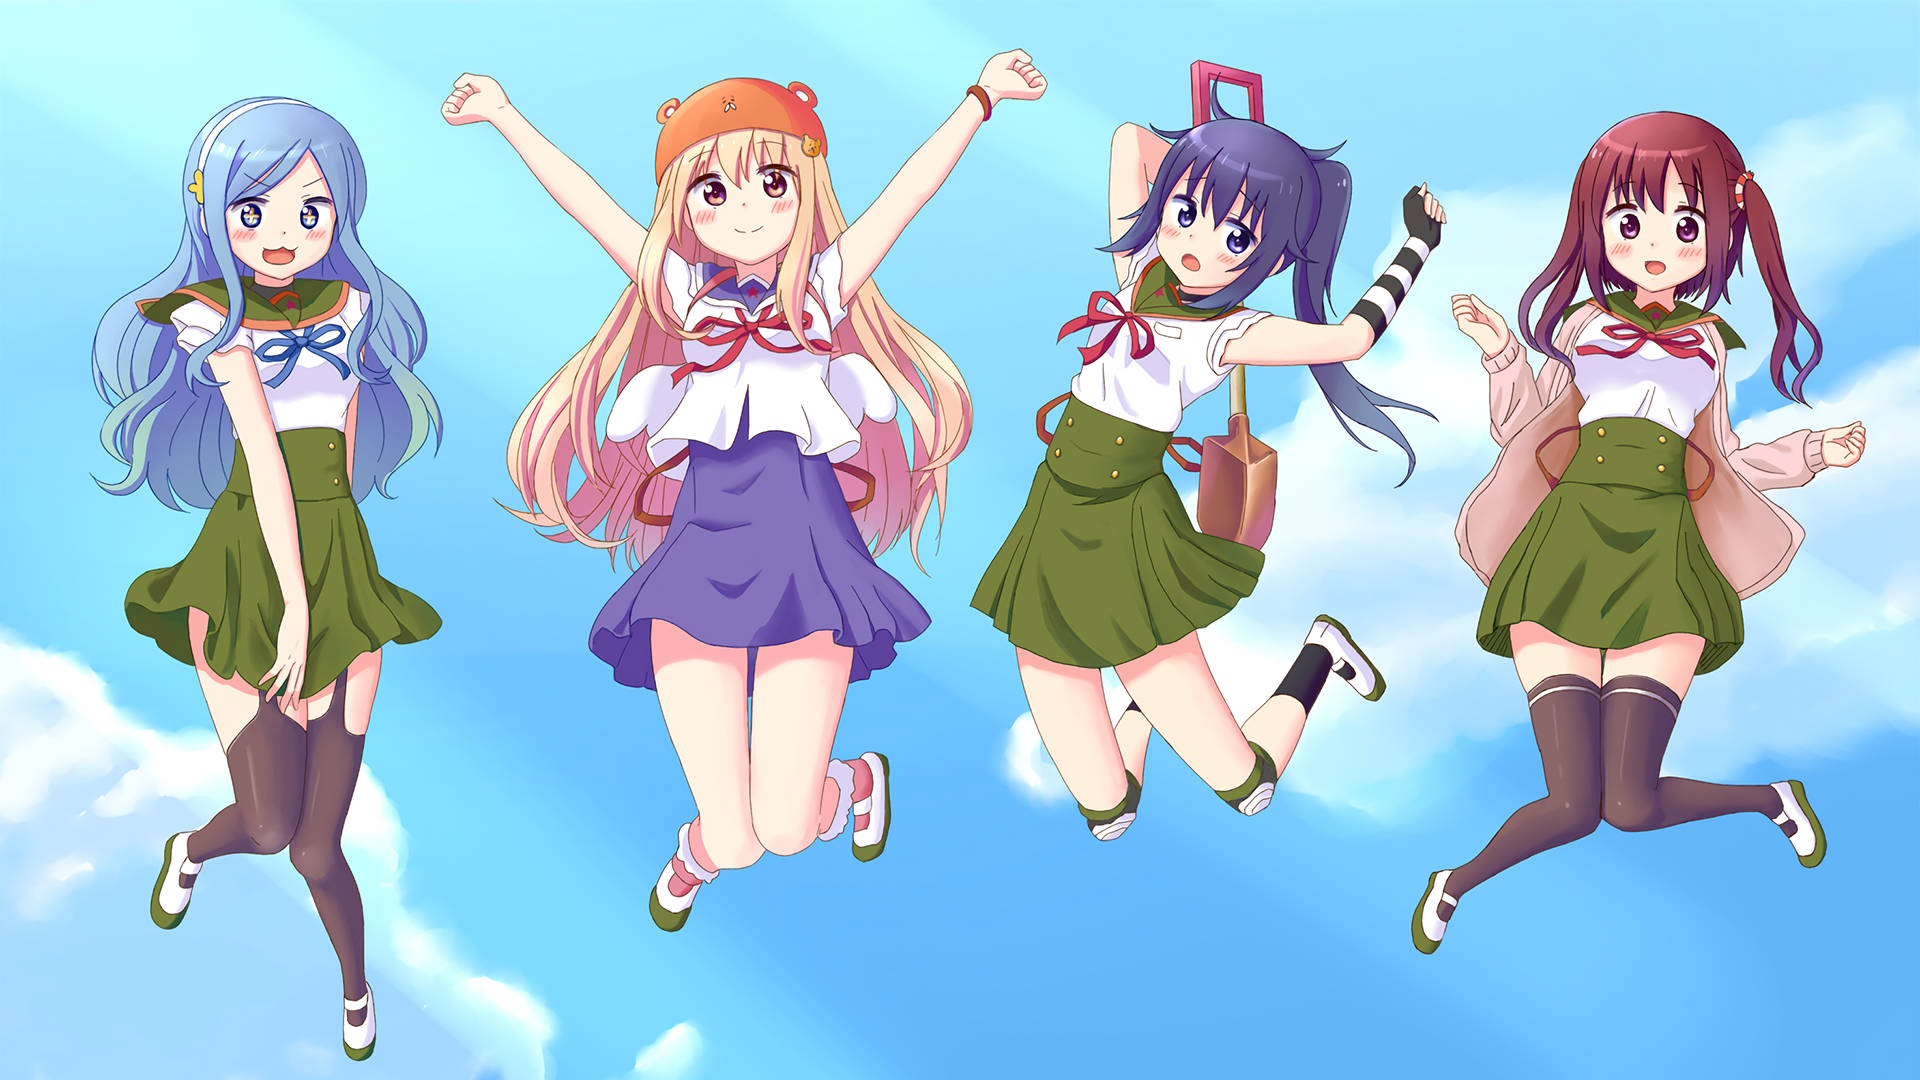 Anime Girls From Himouto! Umaru-chan Background